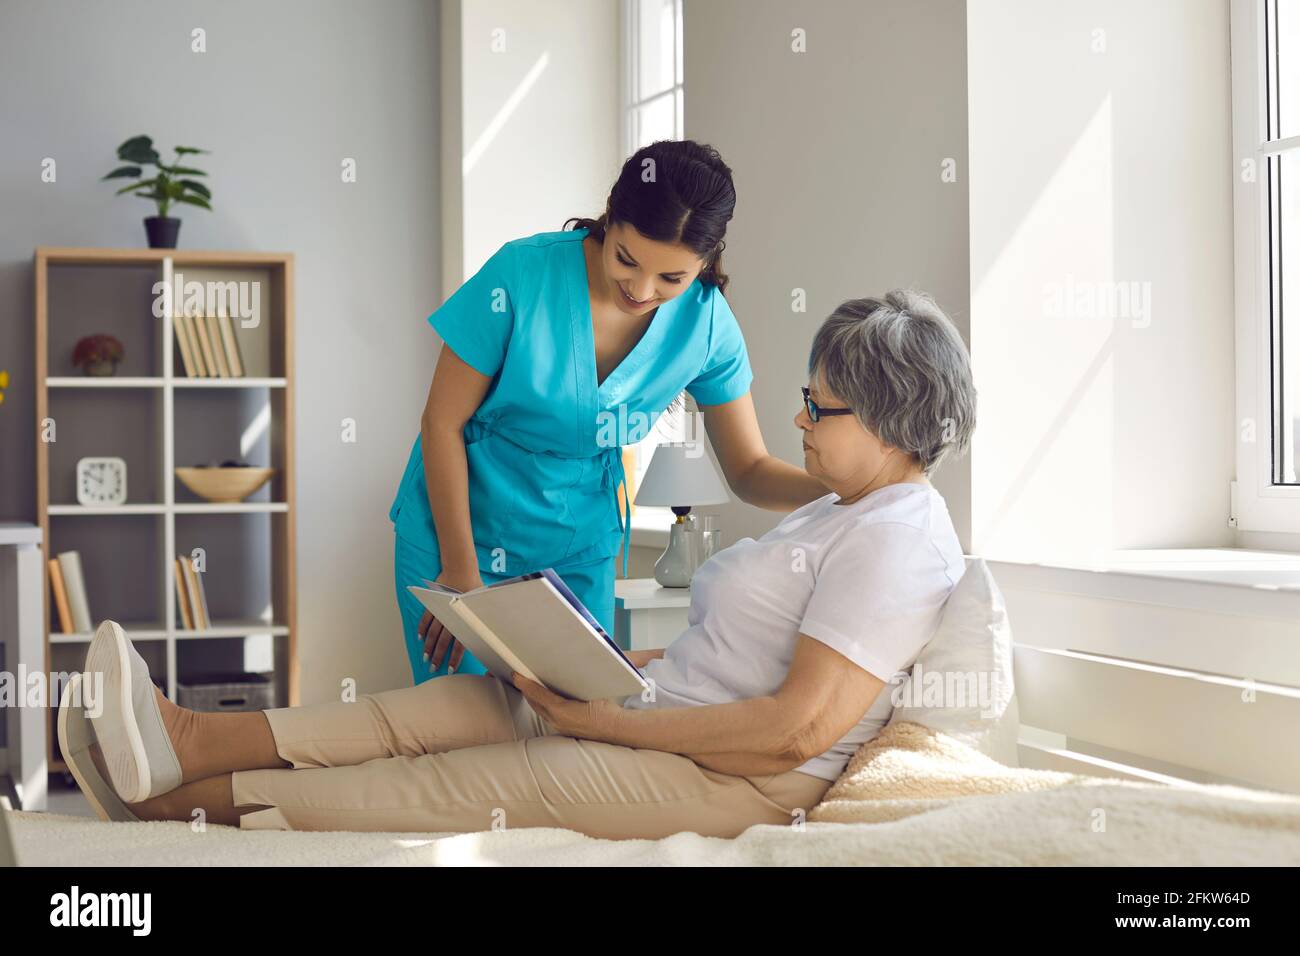 Home care nurse talking to relaxed senior woman who's sitting on bed and reading book Stock Photo